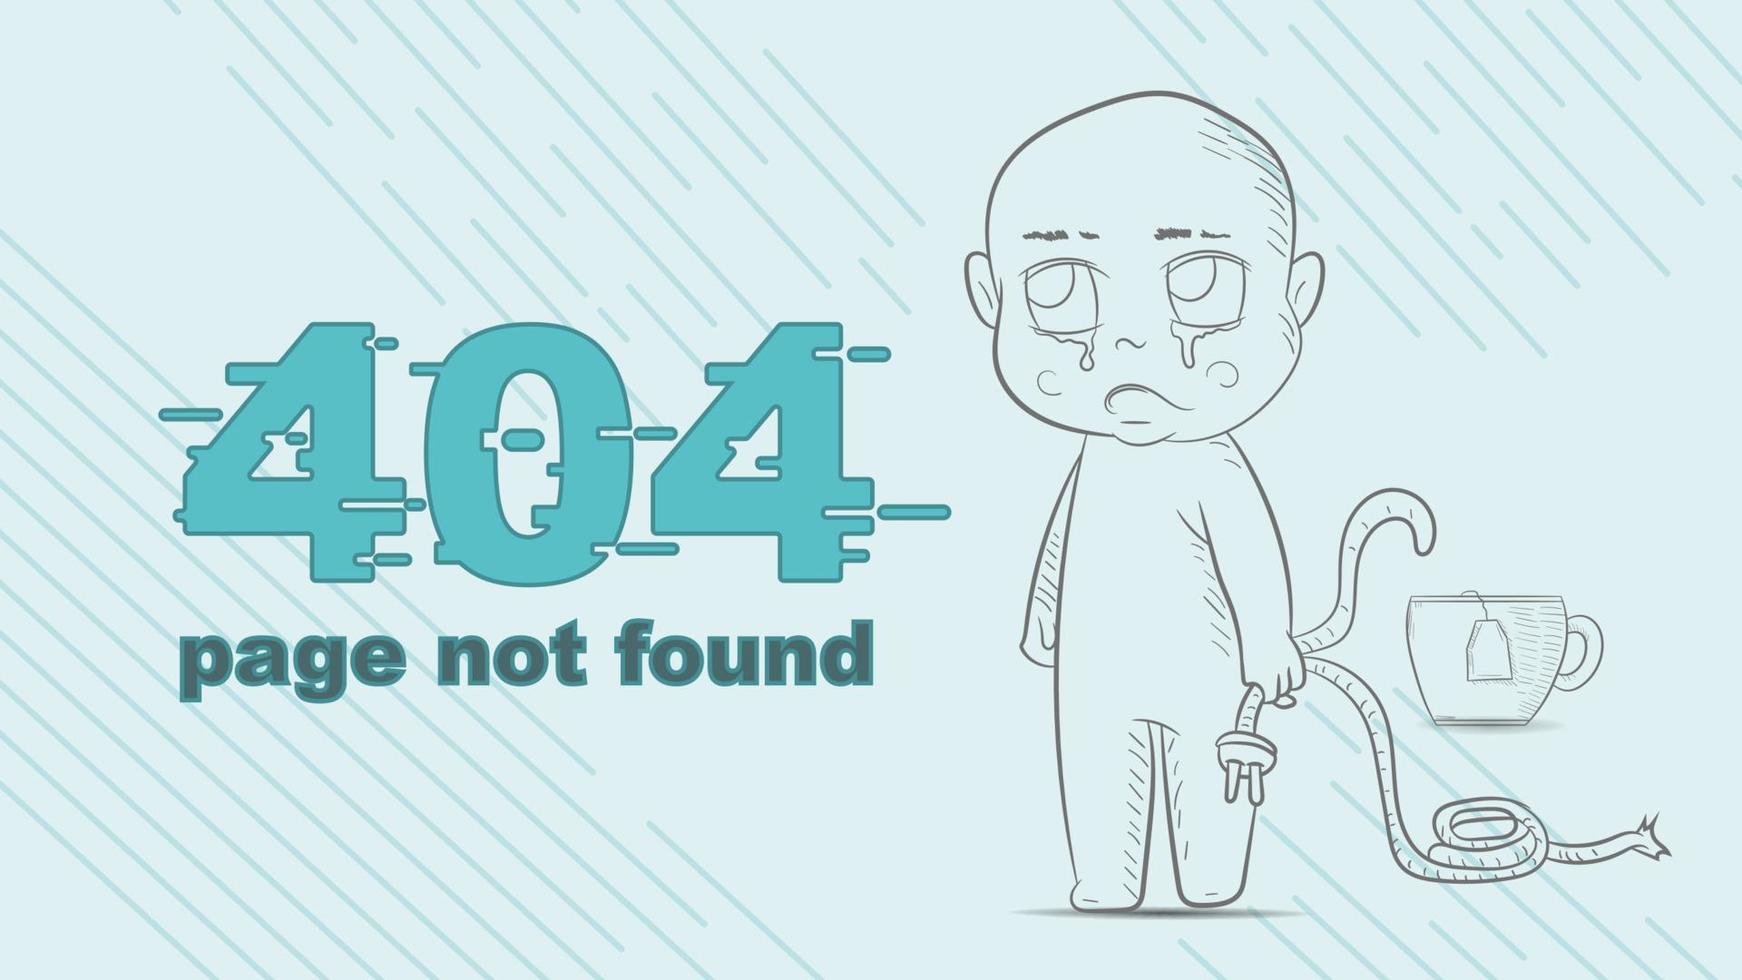 error 404 page not found little man chibi contour drawing holding a broken wire illustration for design design vector